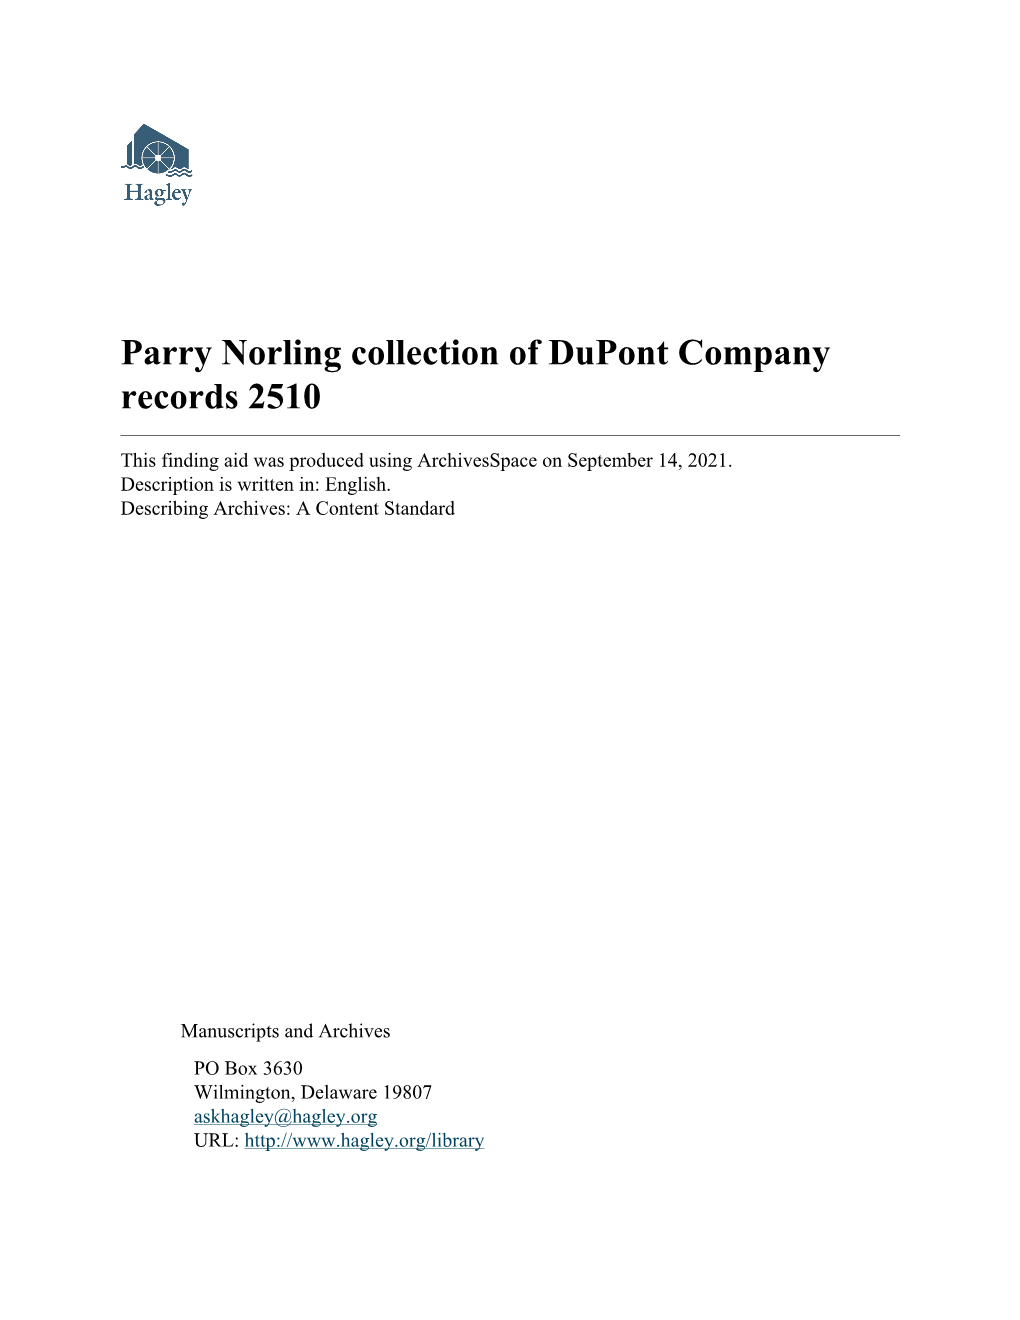 Parry Norling Collection of Dupont Company Records 2510